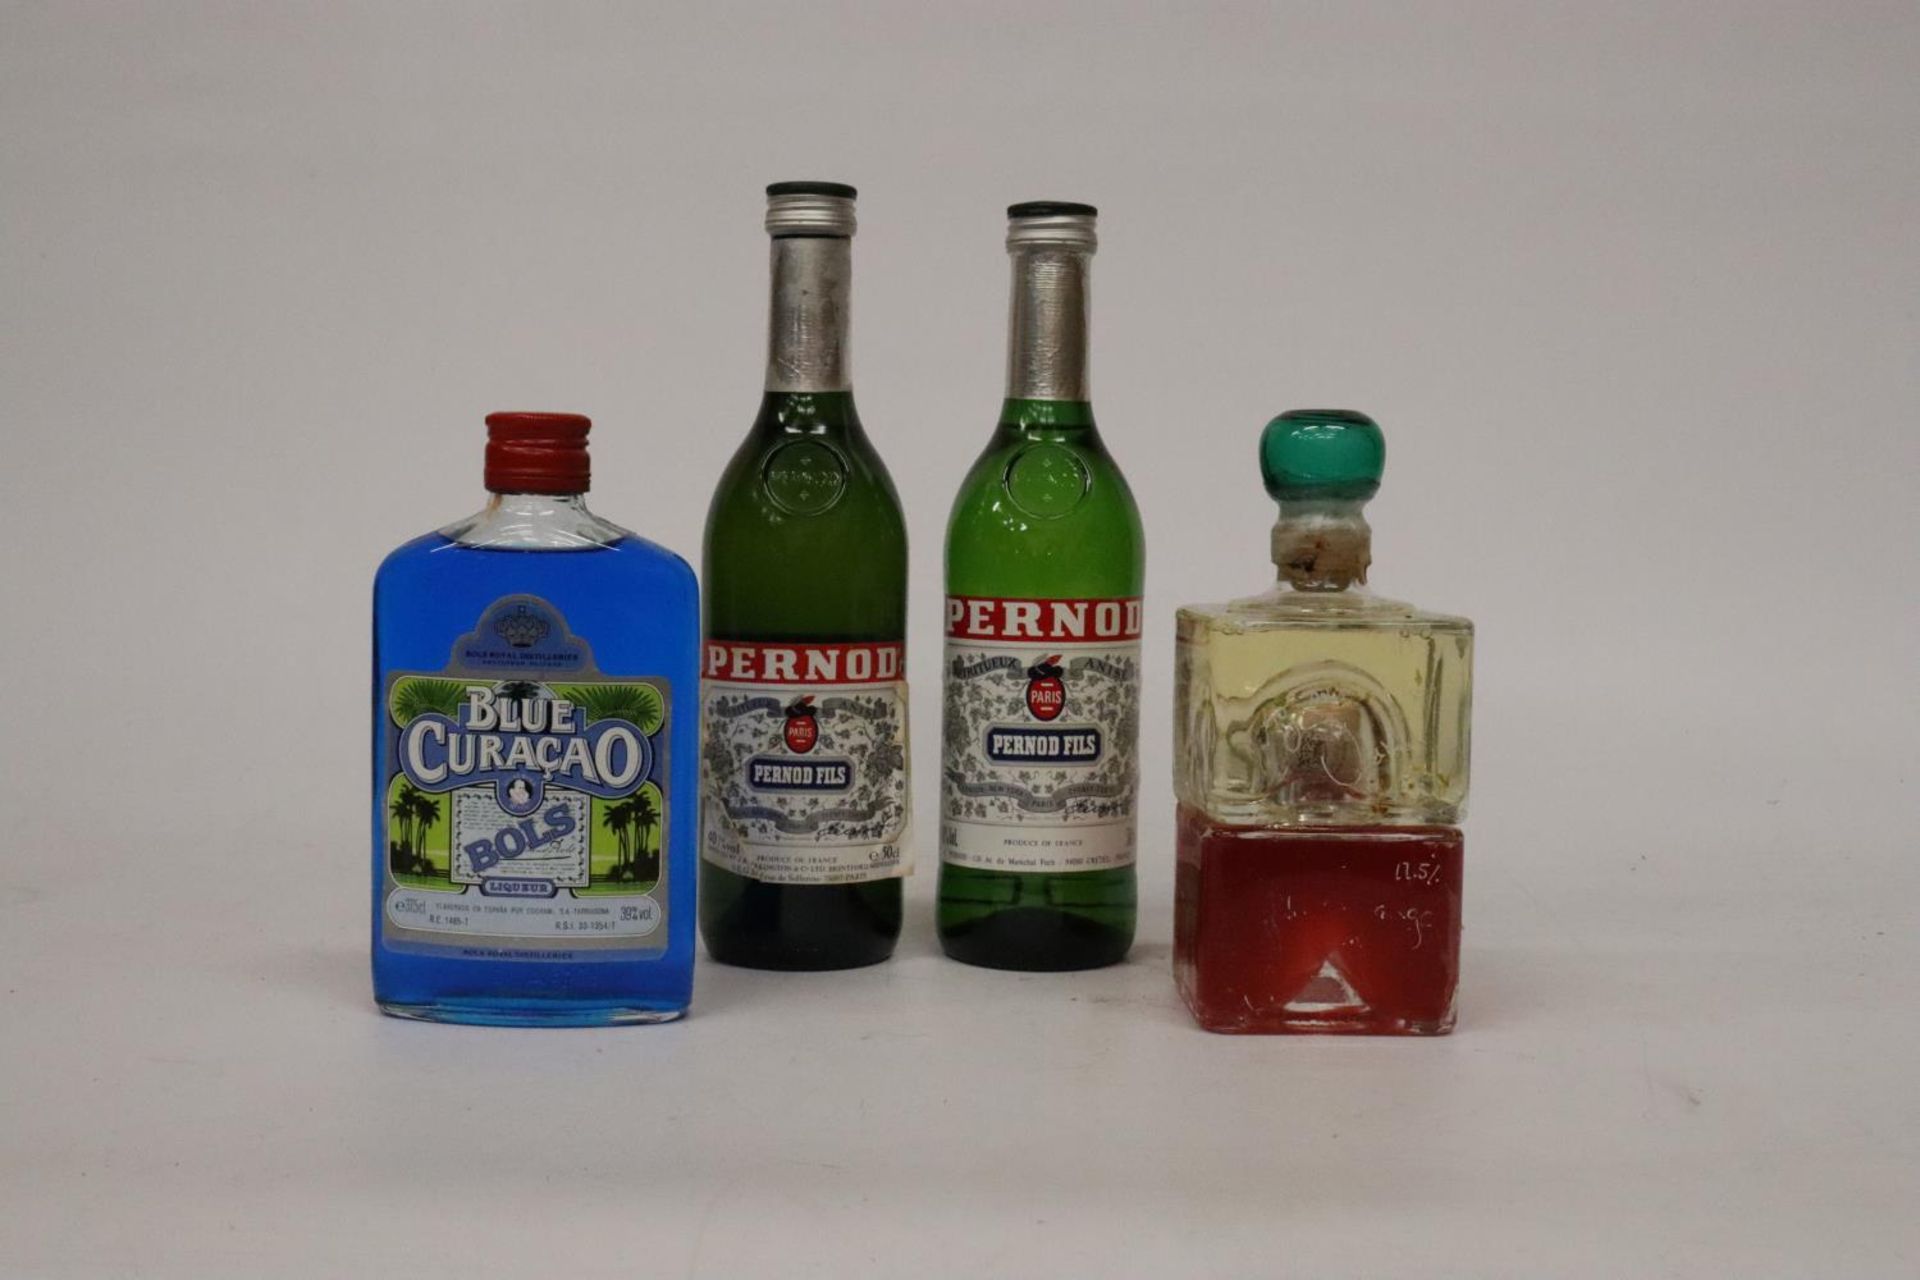 TWO 50CL BOTTLES OF PERNOD FILS, A 37.5CL BOTTLE OF BLUE CURACAO AND A BOTTLE OF - Image 2 of 4